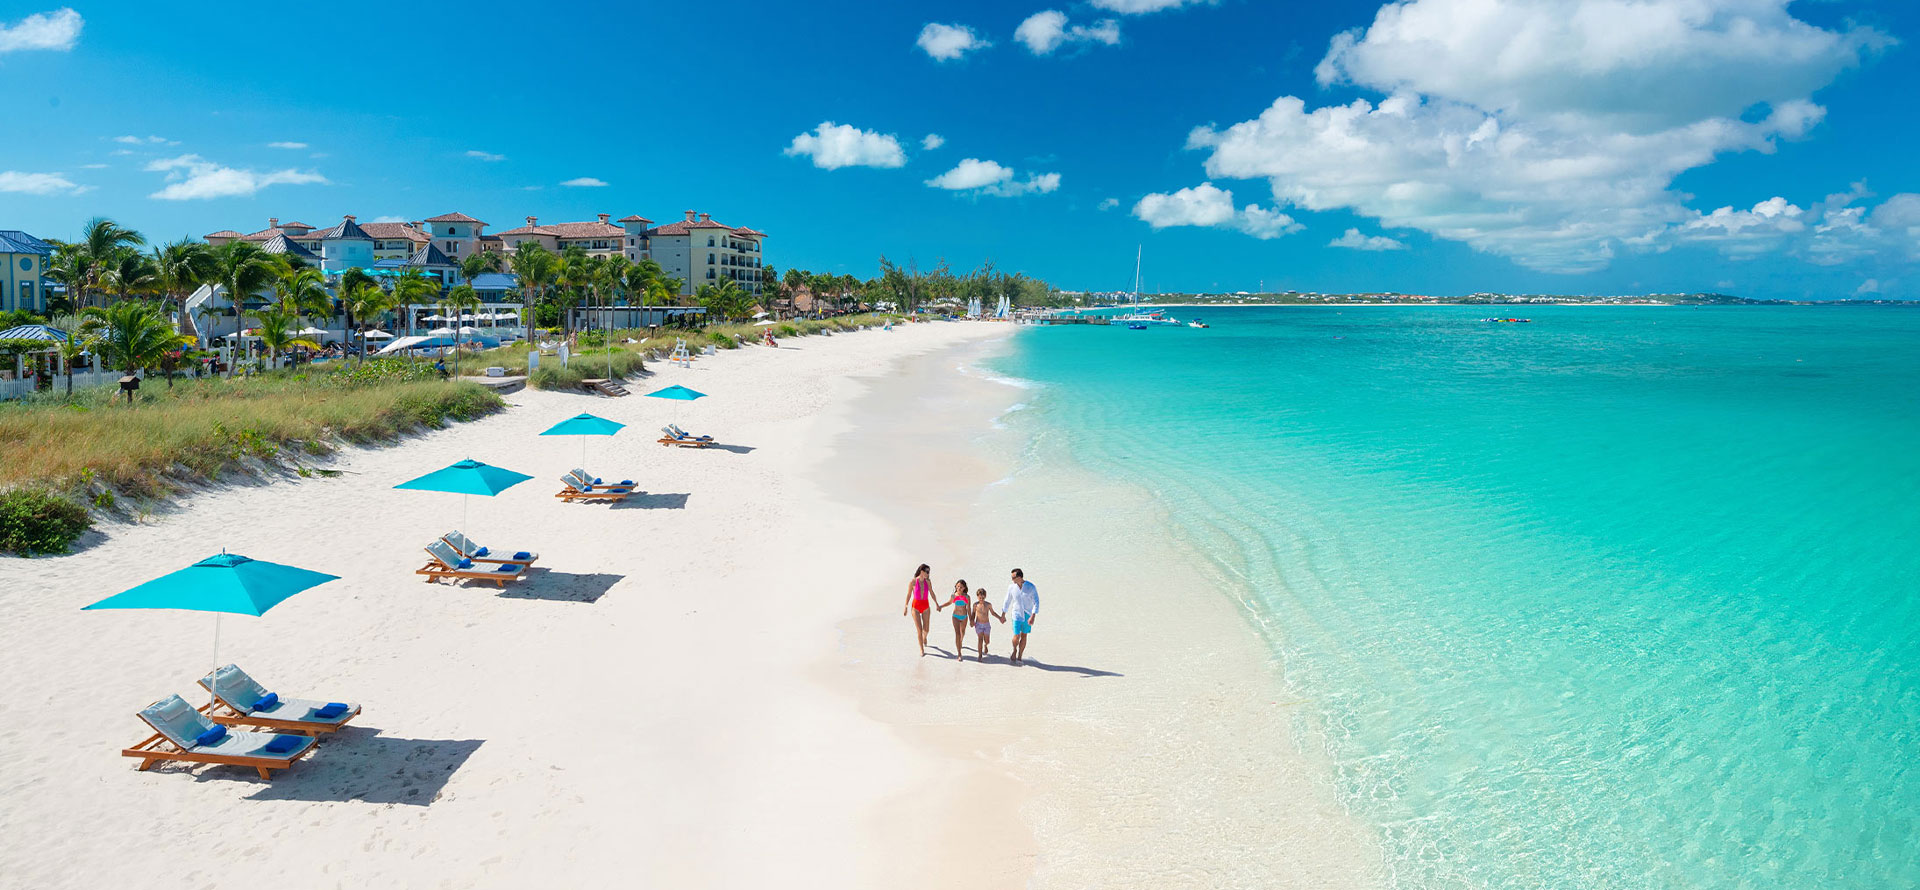 Turks and caicos all inclusive family resorts on the beach.